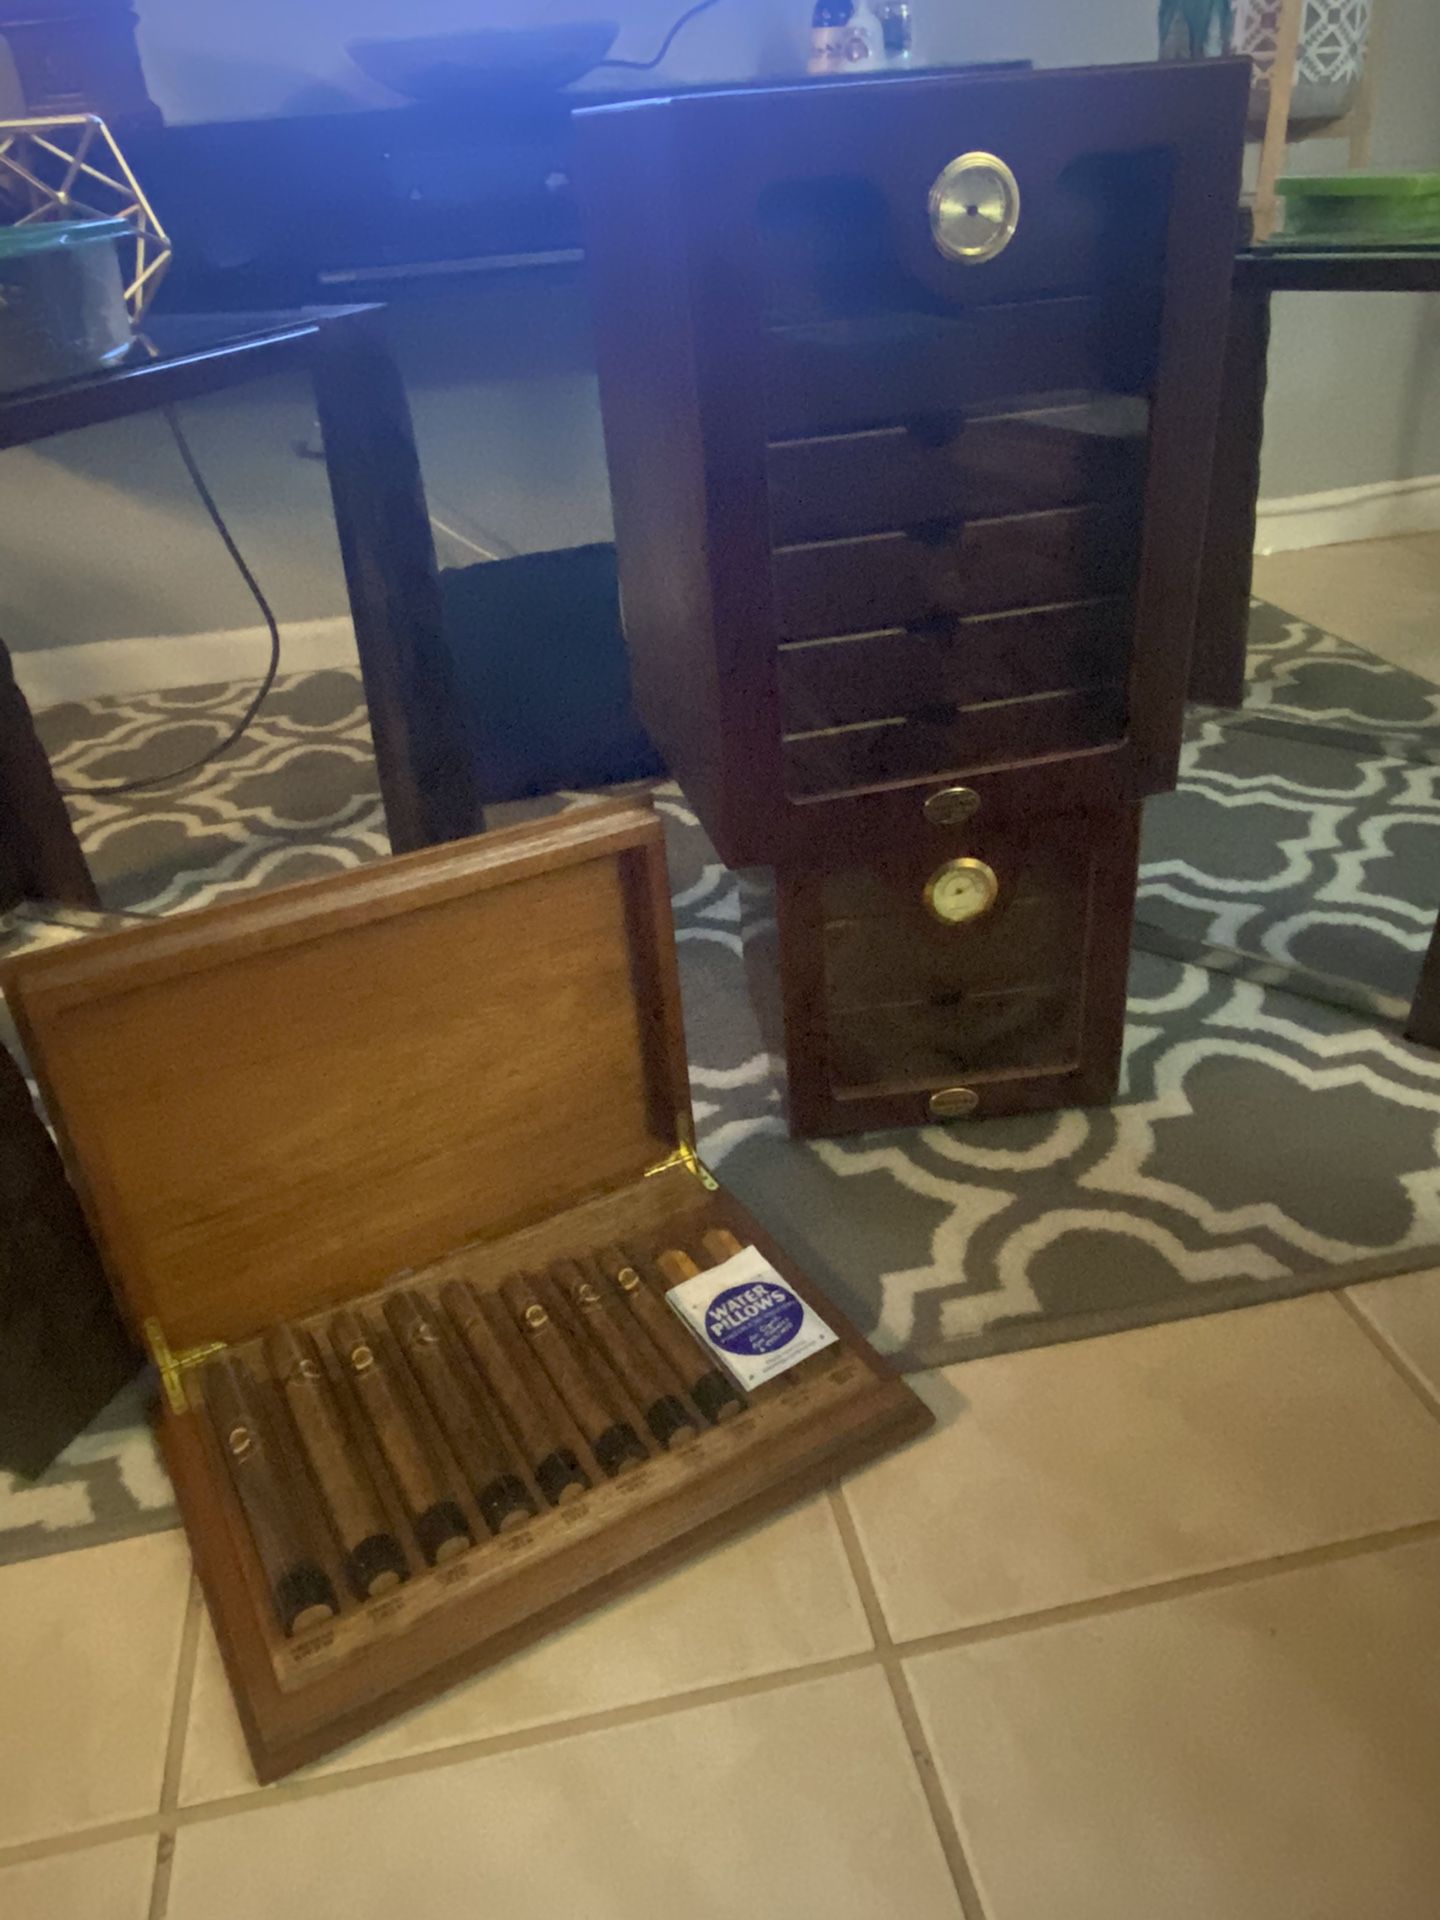 2 tabaco humidifier filled with tabacos